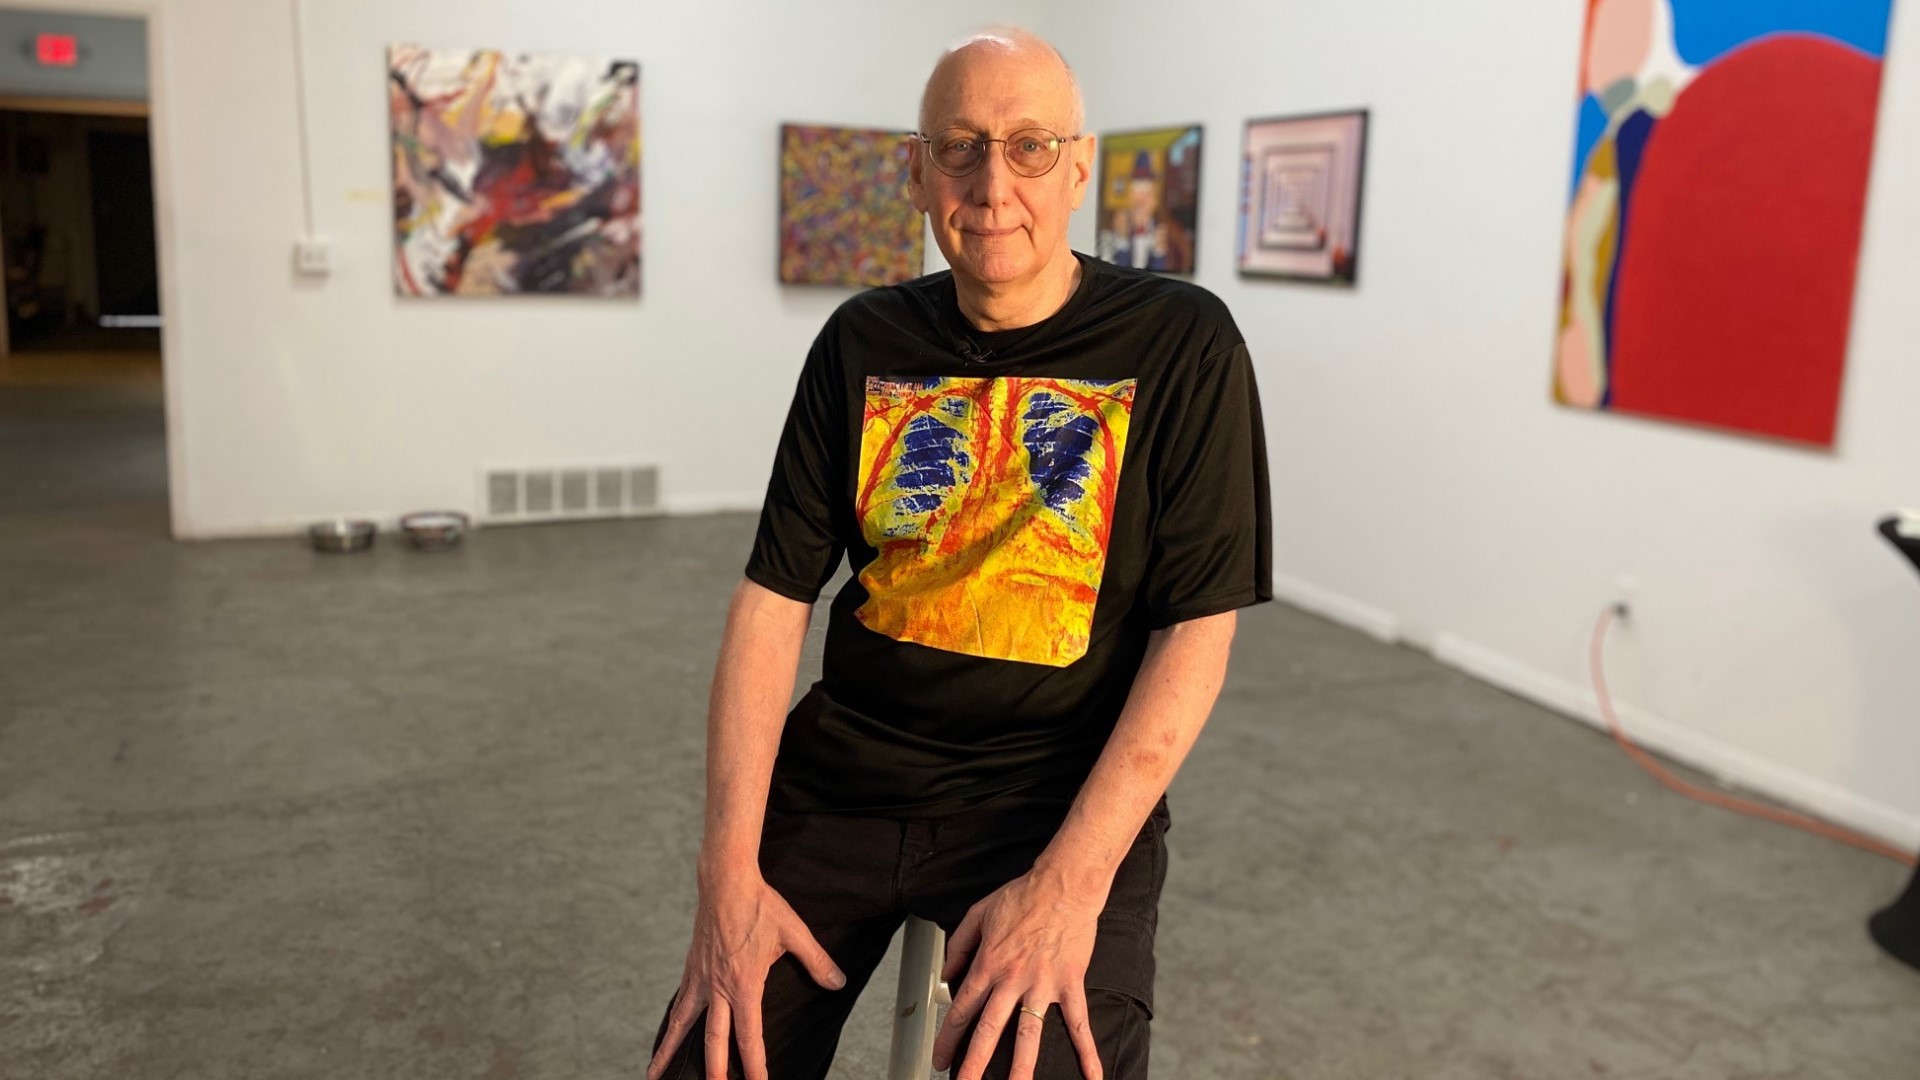 Paul Volker is an artist who is thankful for the double lung transplant that saved his life.